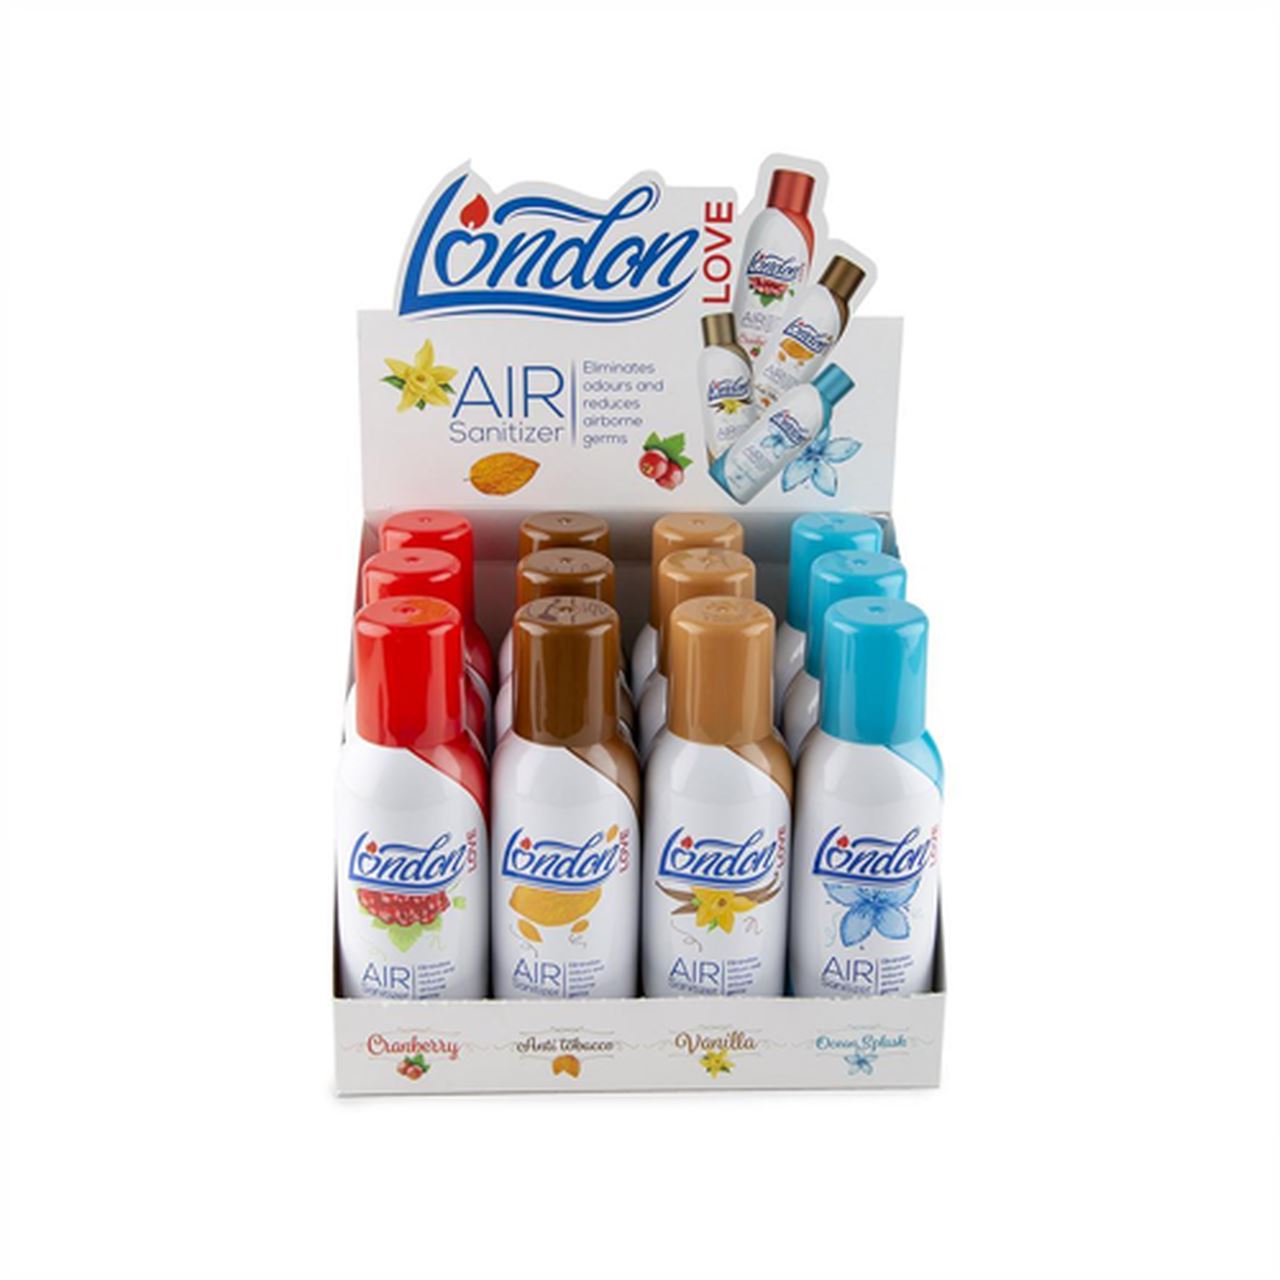 London Love Air Sanitizer - 12pc Display w/ 4 Assorted Scents at Flower Power Packages